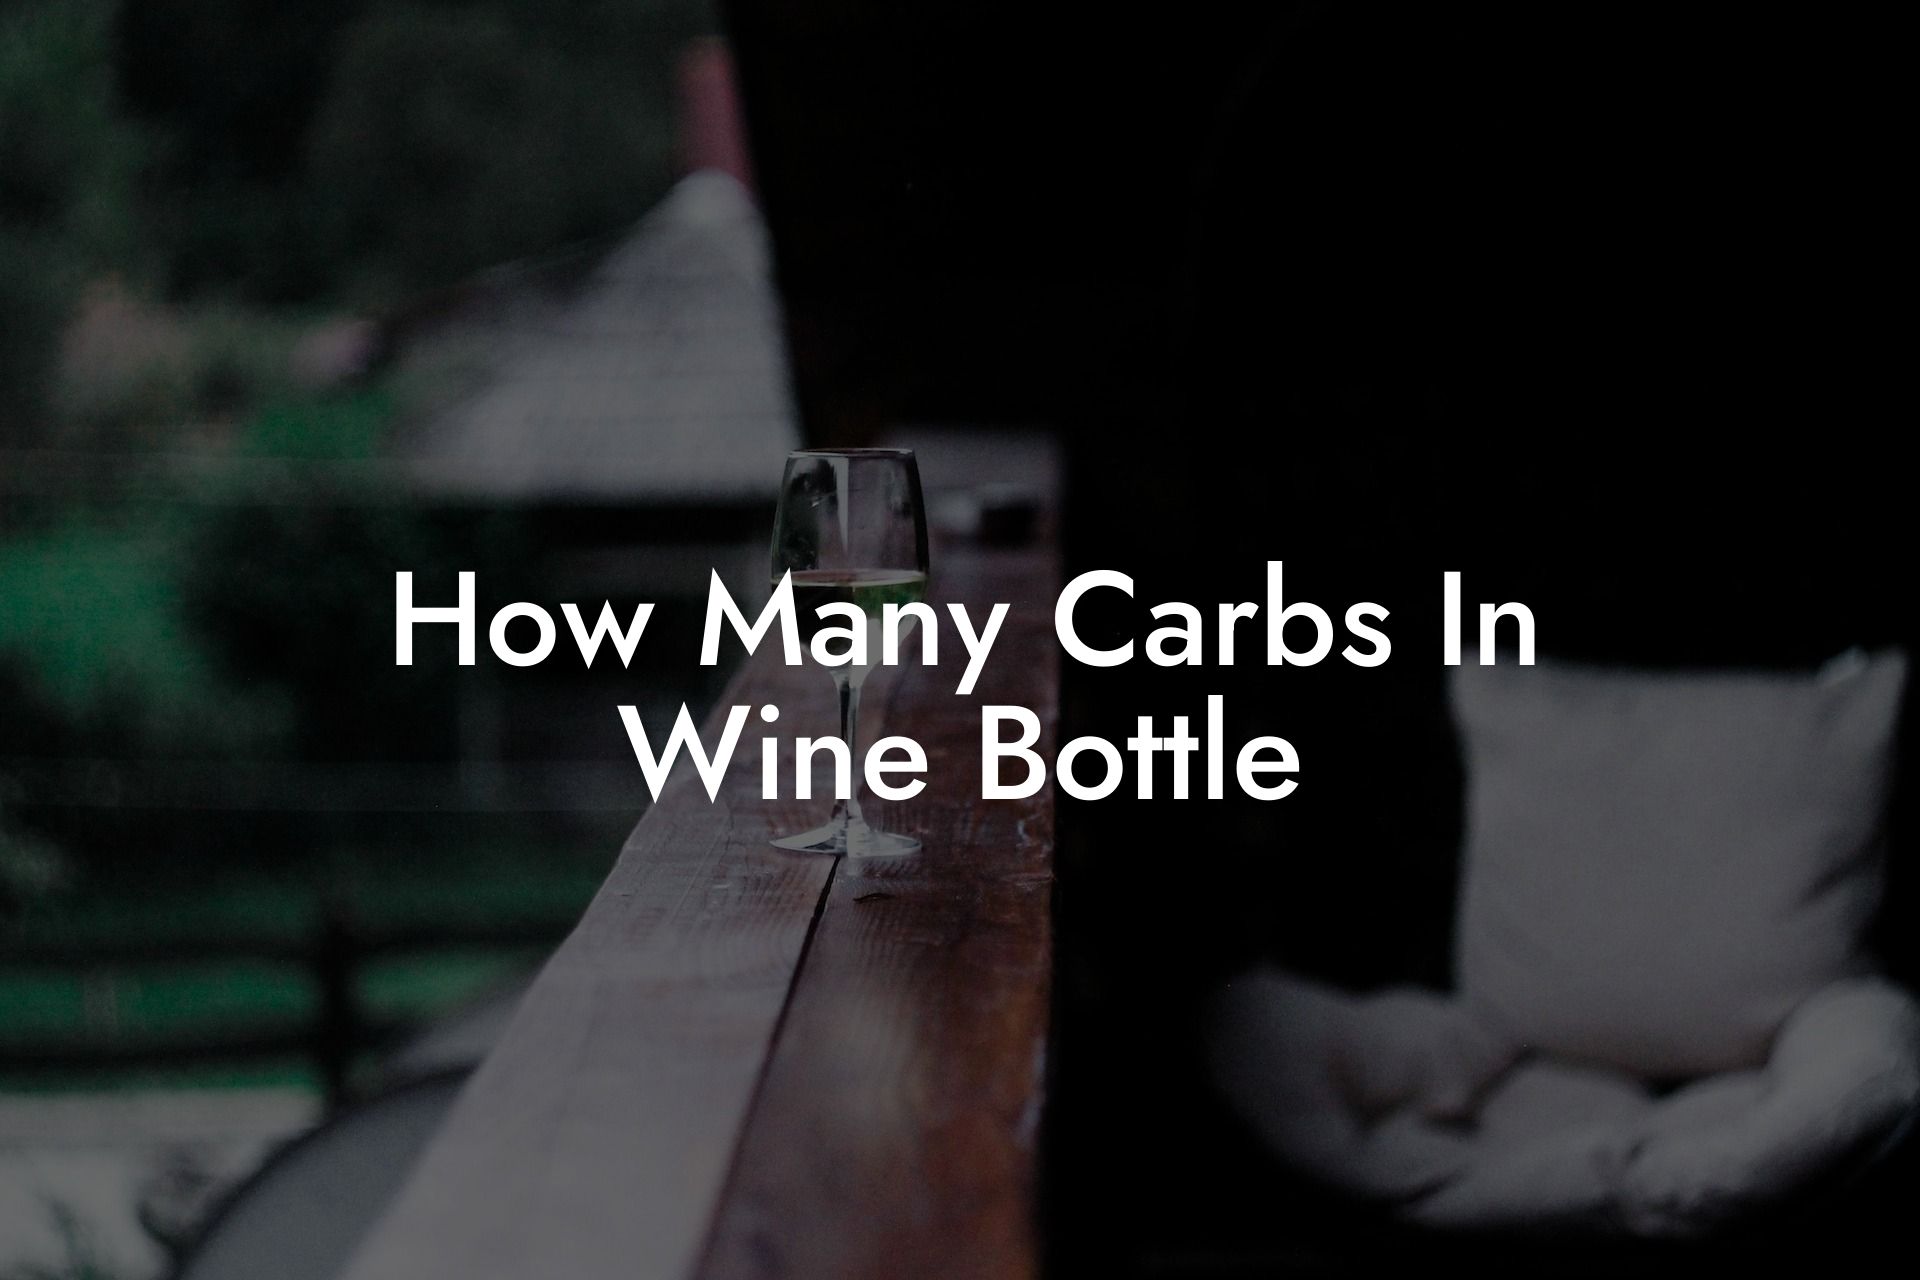 How Many Carbs In Wine Bottle